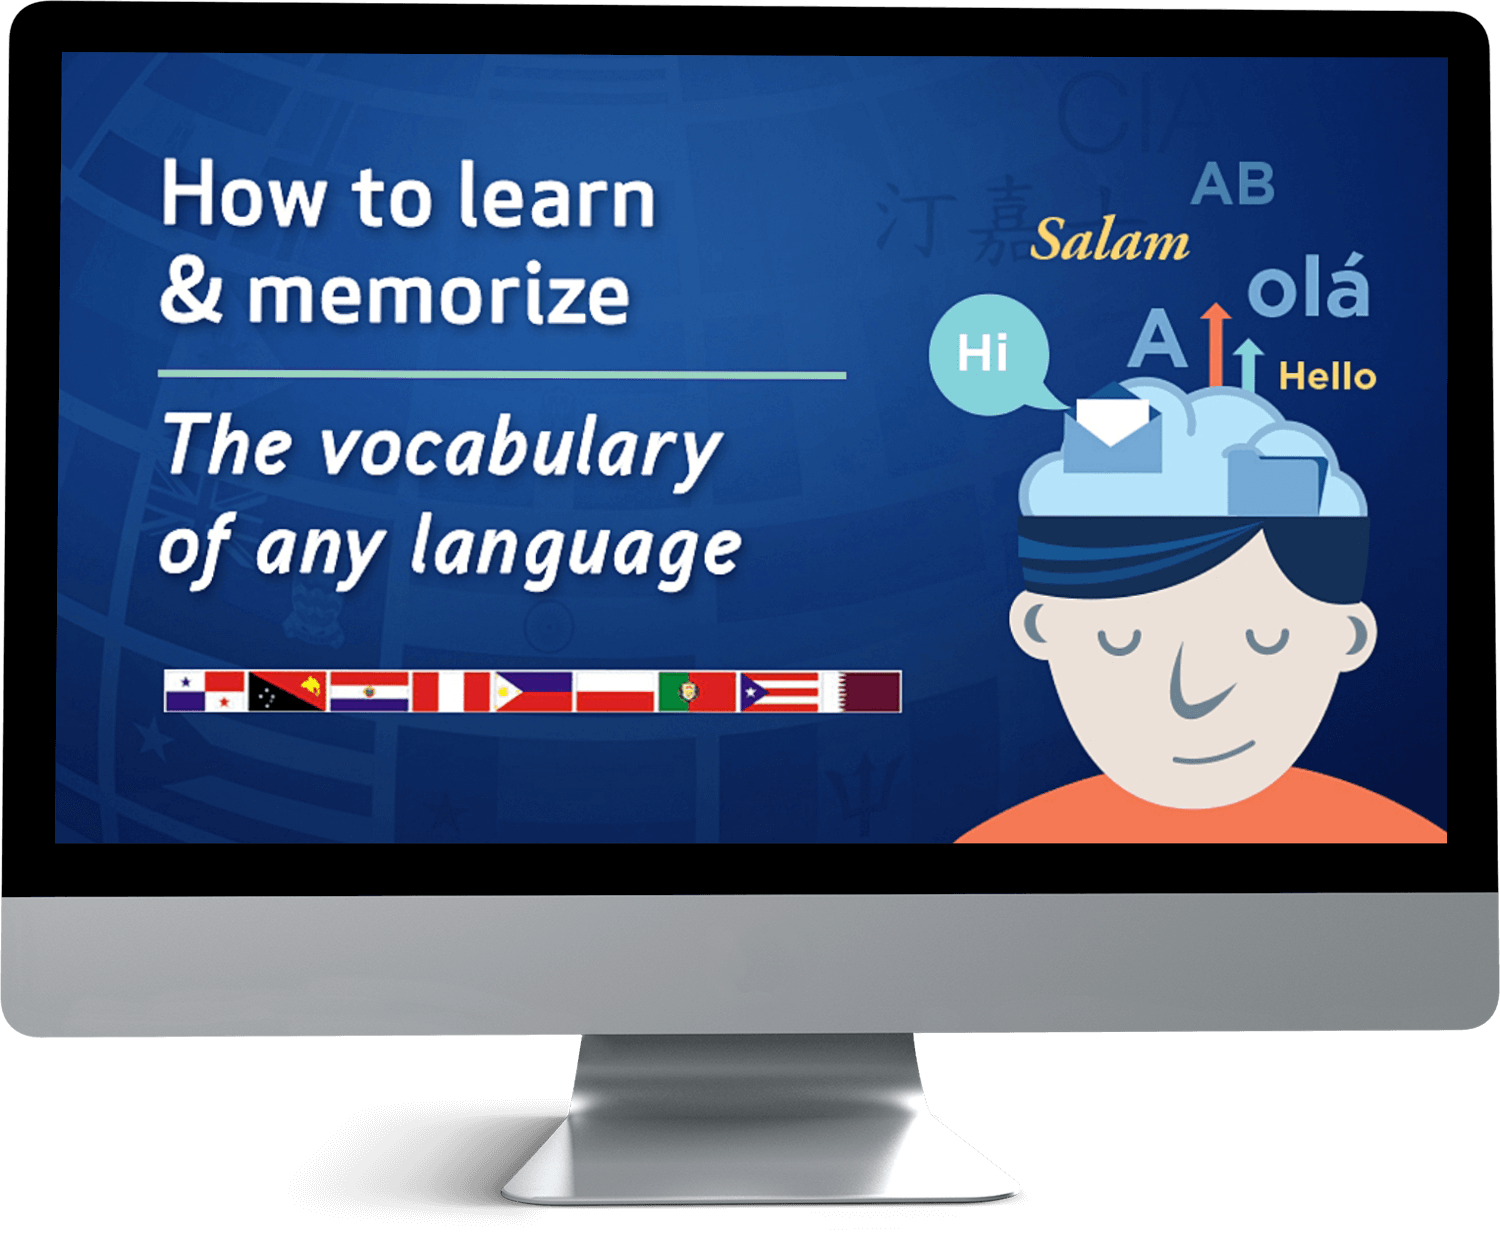 How to learn and memorize the vocabulary of any language